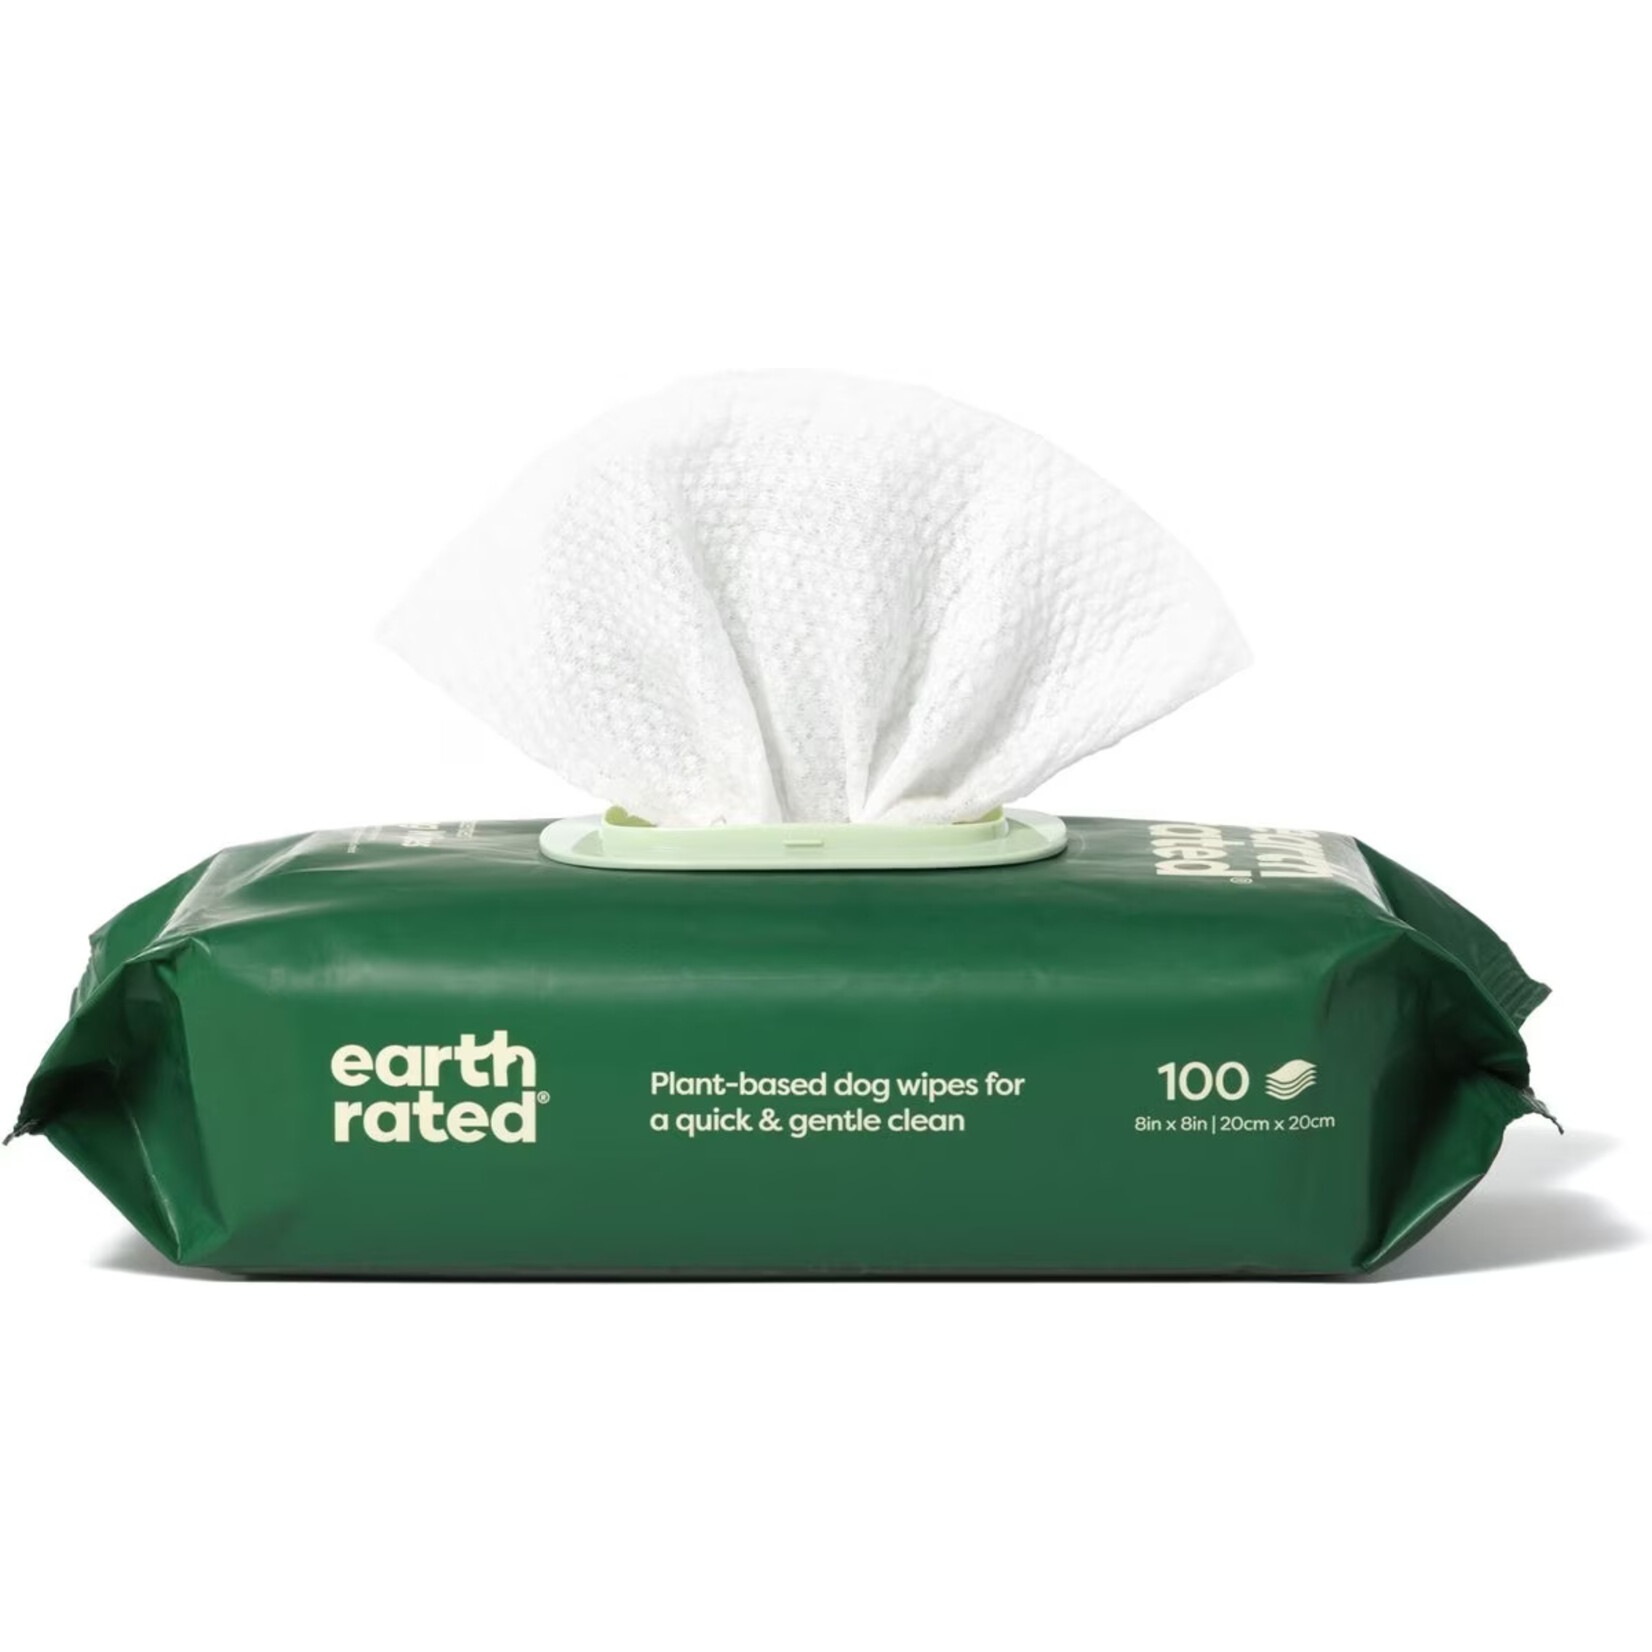 Earth Rated Earth Rated Unscented Pet Grooming Wipes